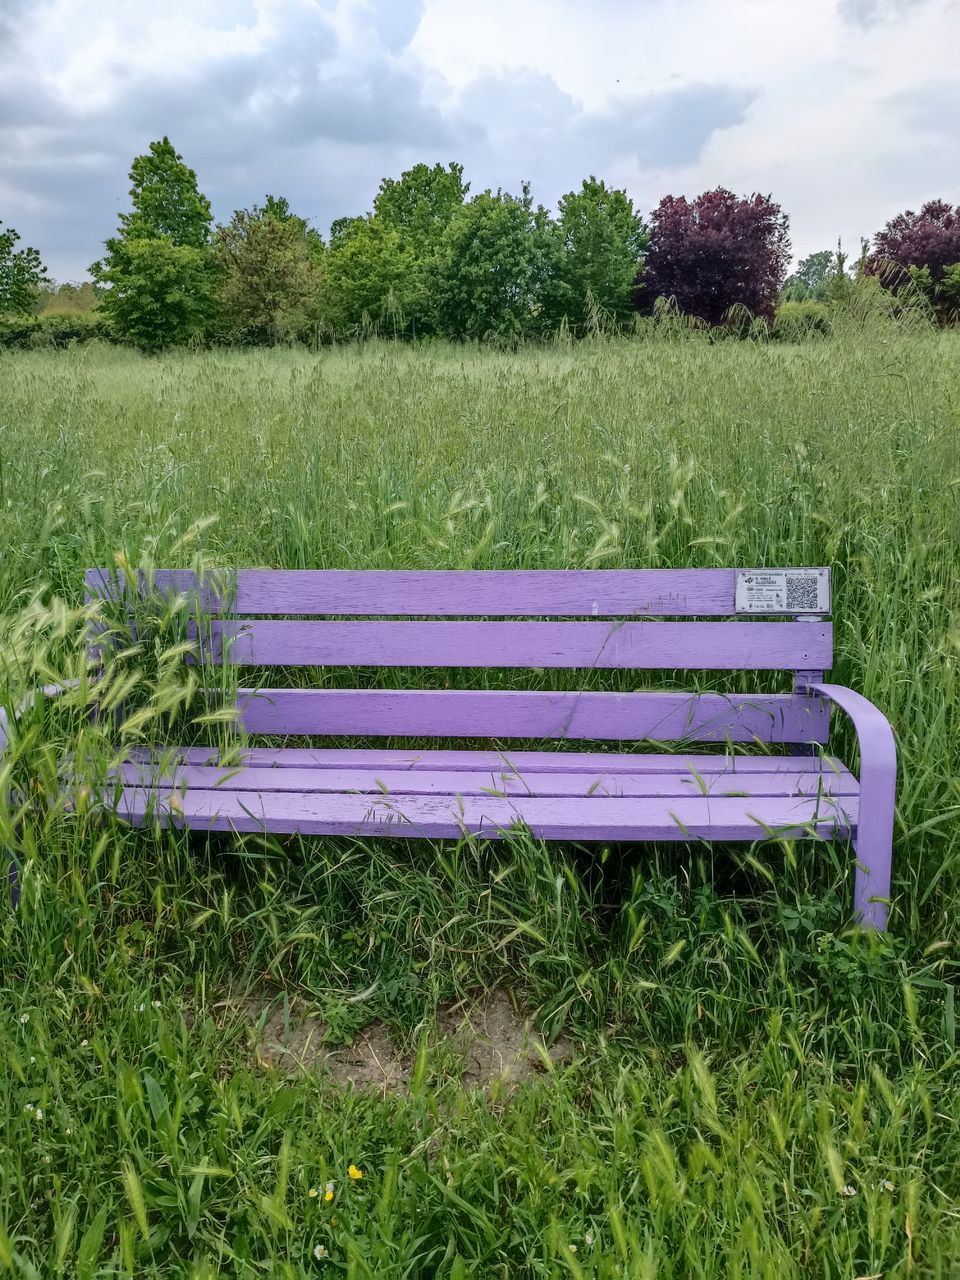 plant, grass, bench, nature, green, seat, meadow, cloud, field, tranquility, growth, sky, park bench, land, landscape, no people, beauty in nature, lawn, tranquil scene, flower, day, tree, furniture, empty, park, relaxation, outdoors, scenics - nature, absence, environment, rural area, rural scene, pasture, park - man made space, wood, plain